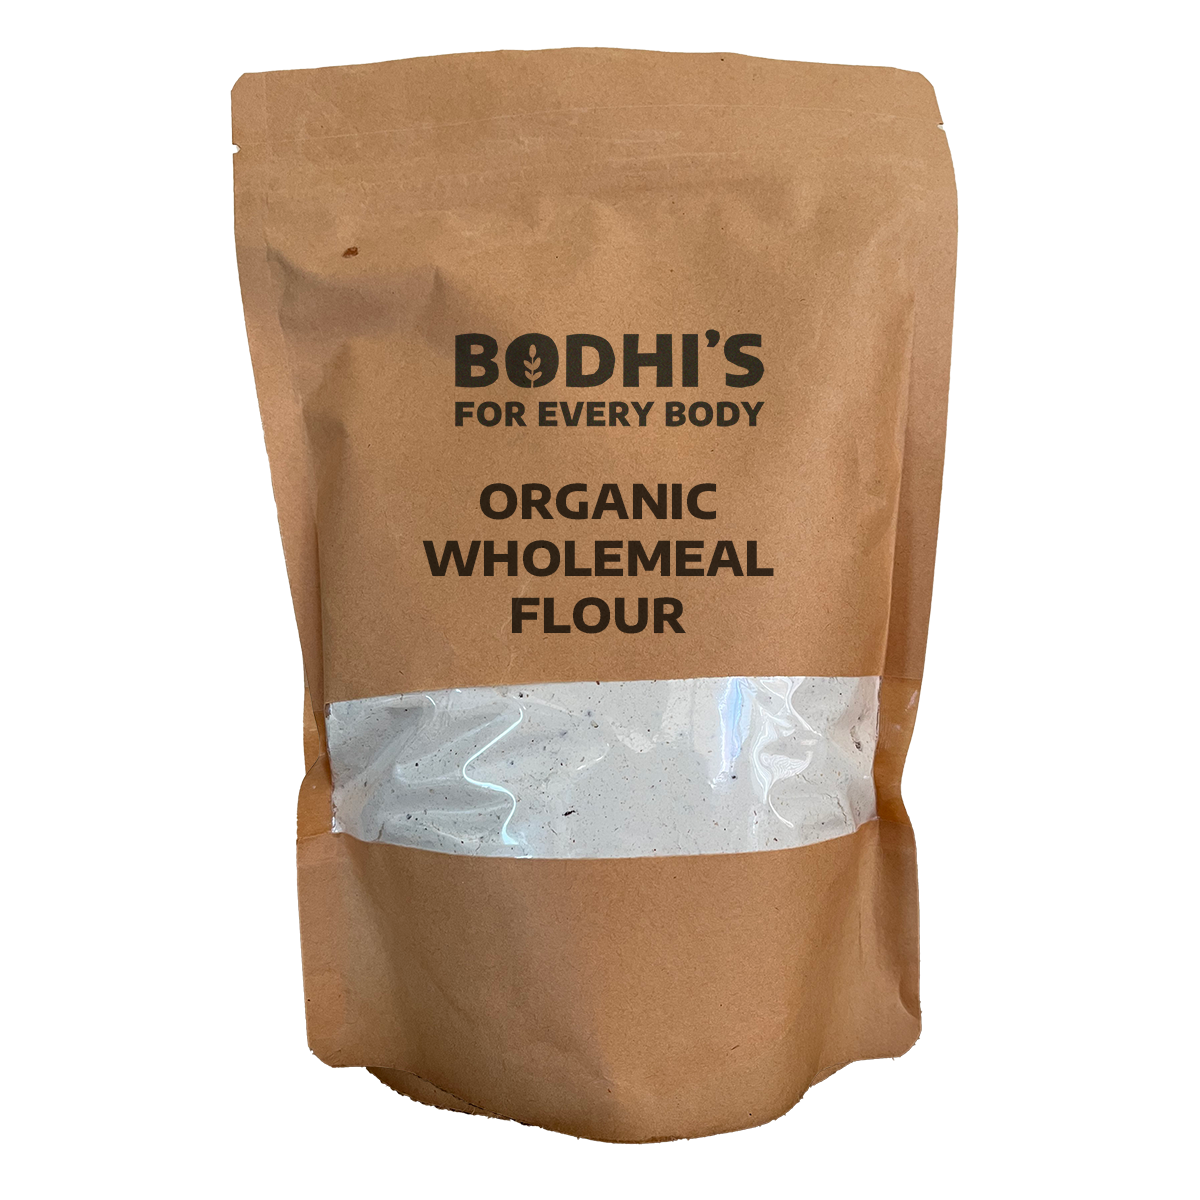 A photo of Bodhi's Organic Wholemeal Flour